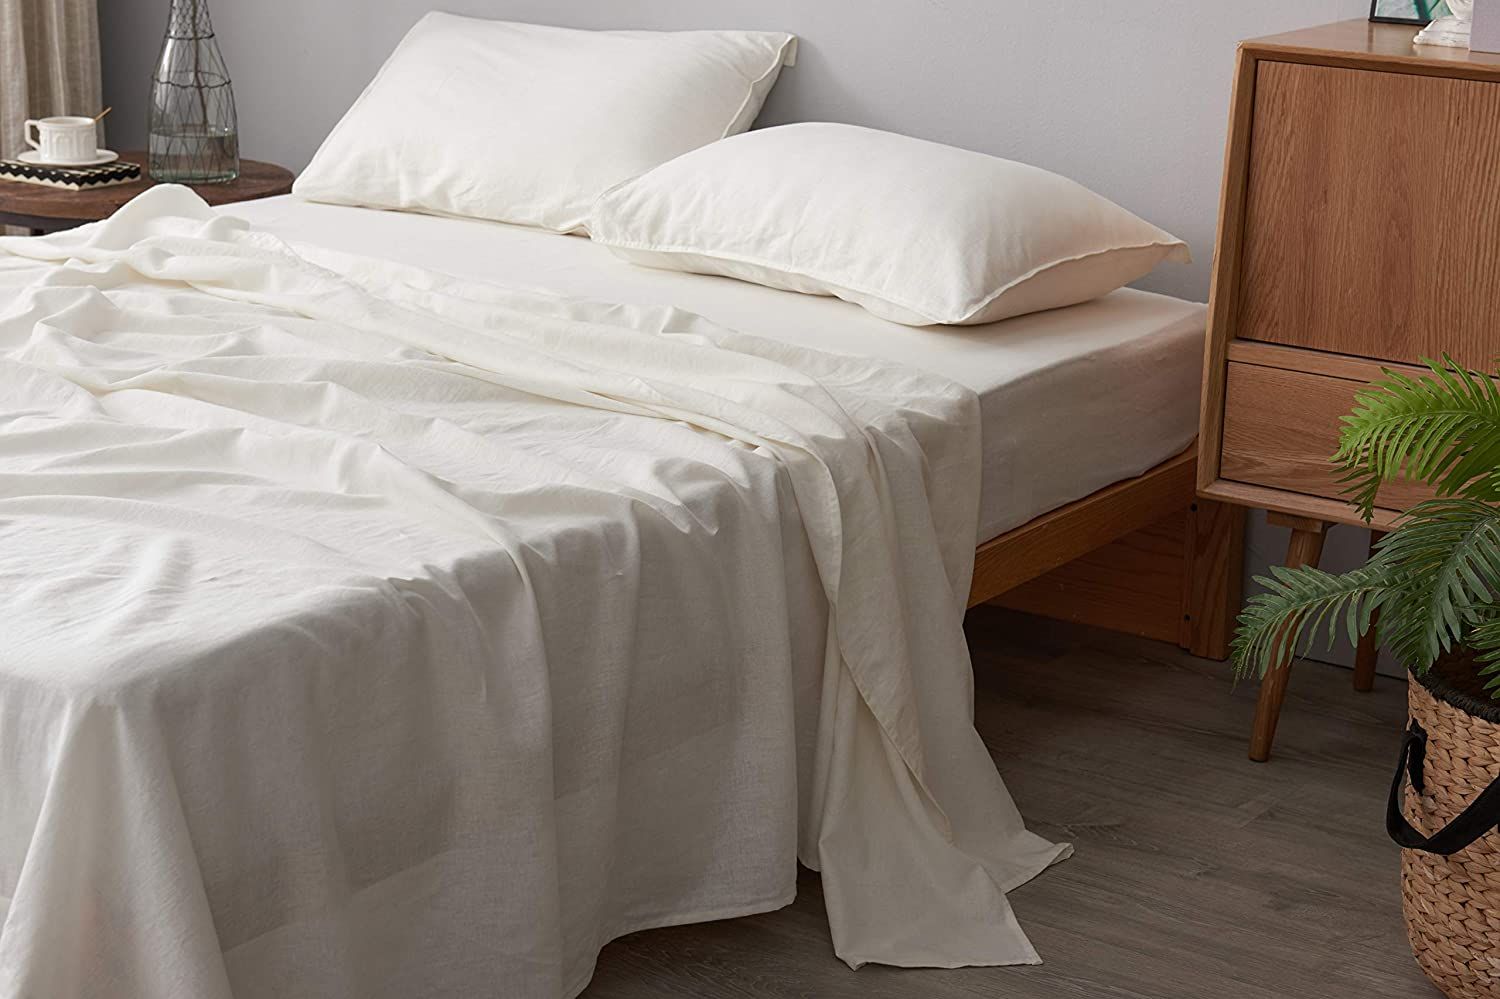 Consider Airy and Lightweight Bedding Layers